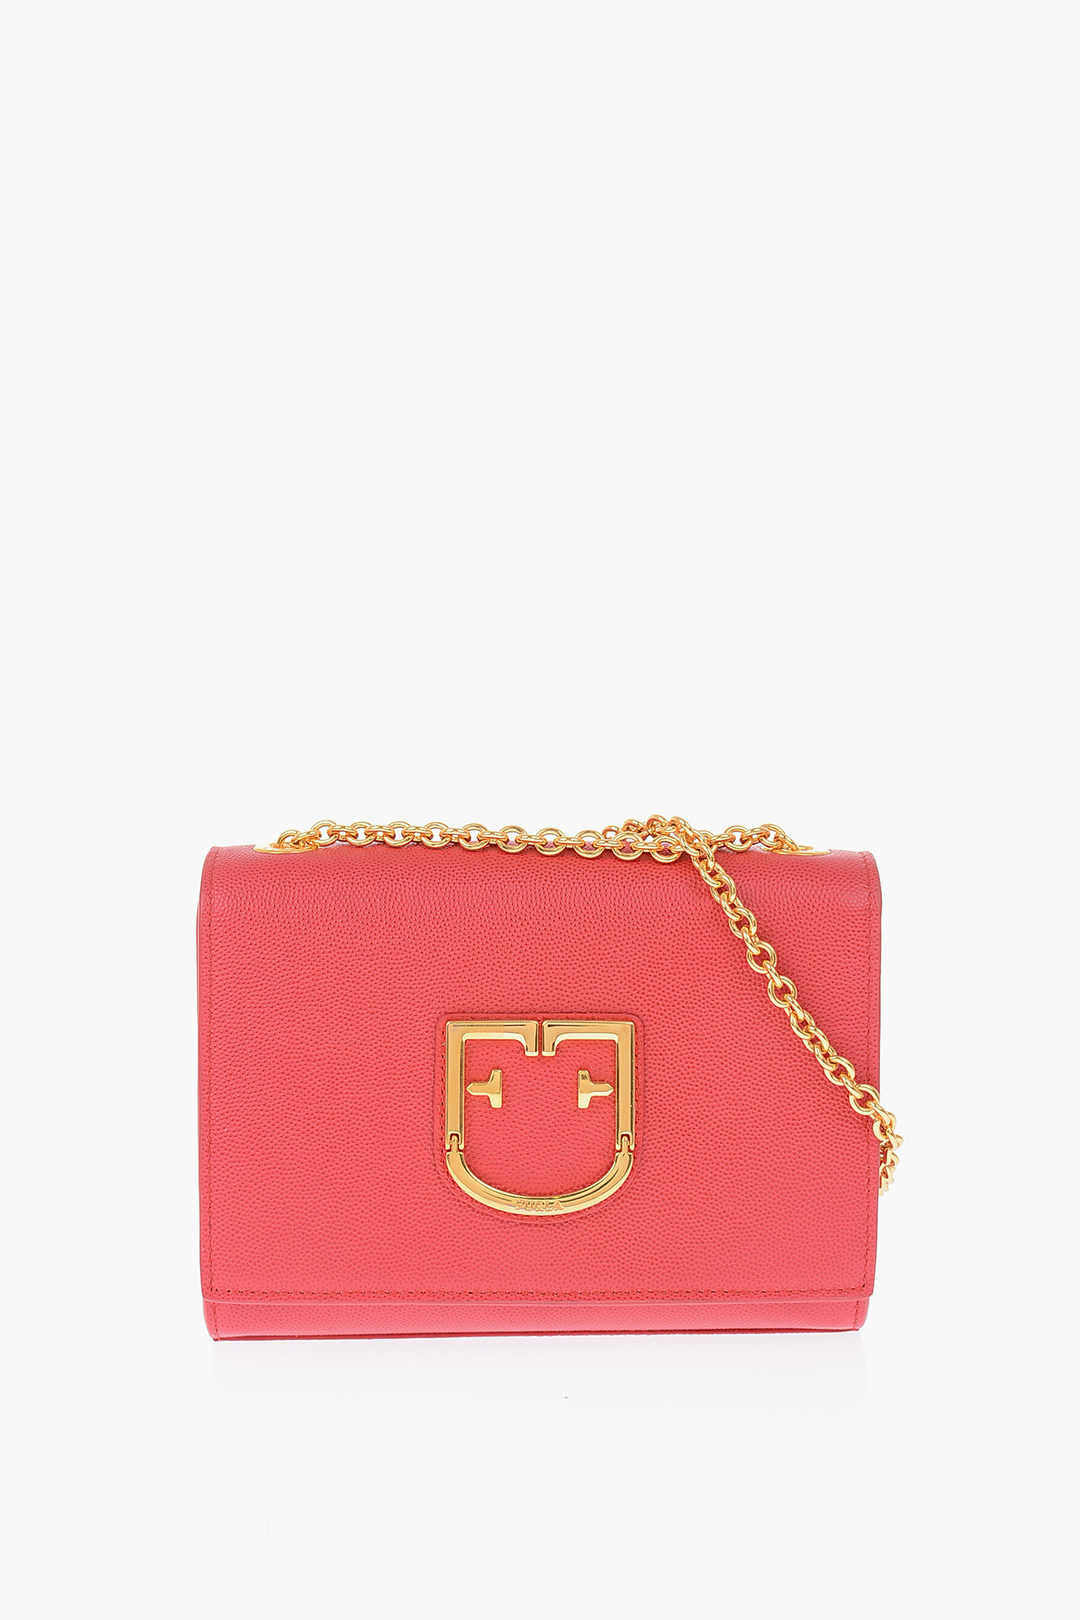 Ruby Small Saffiano Leather Crossbody Bag - clothing & accessories - by  owner - apparel sale - craigslist